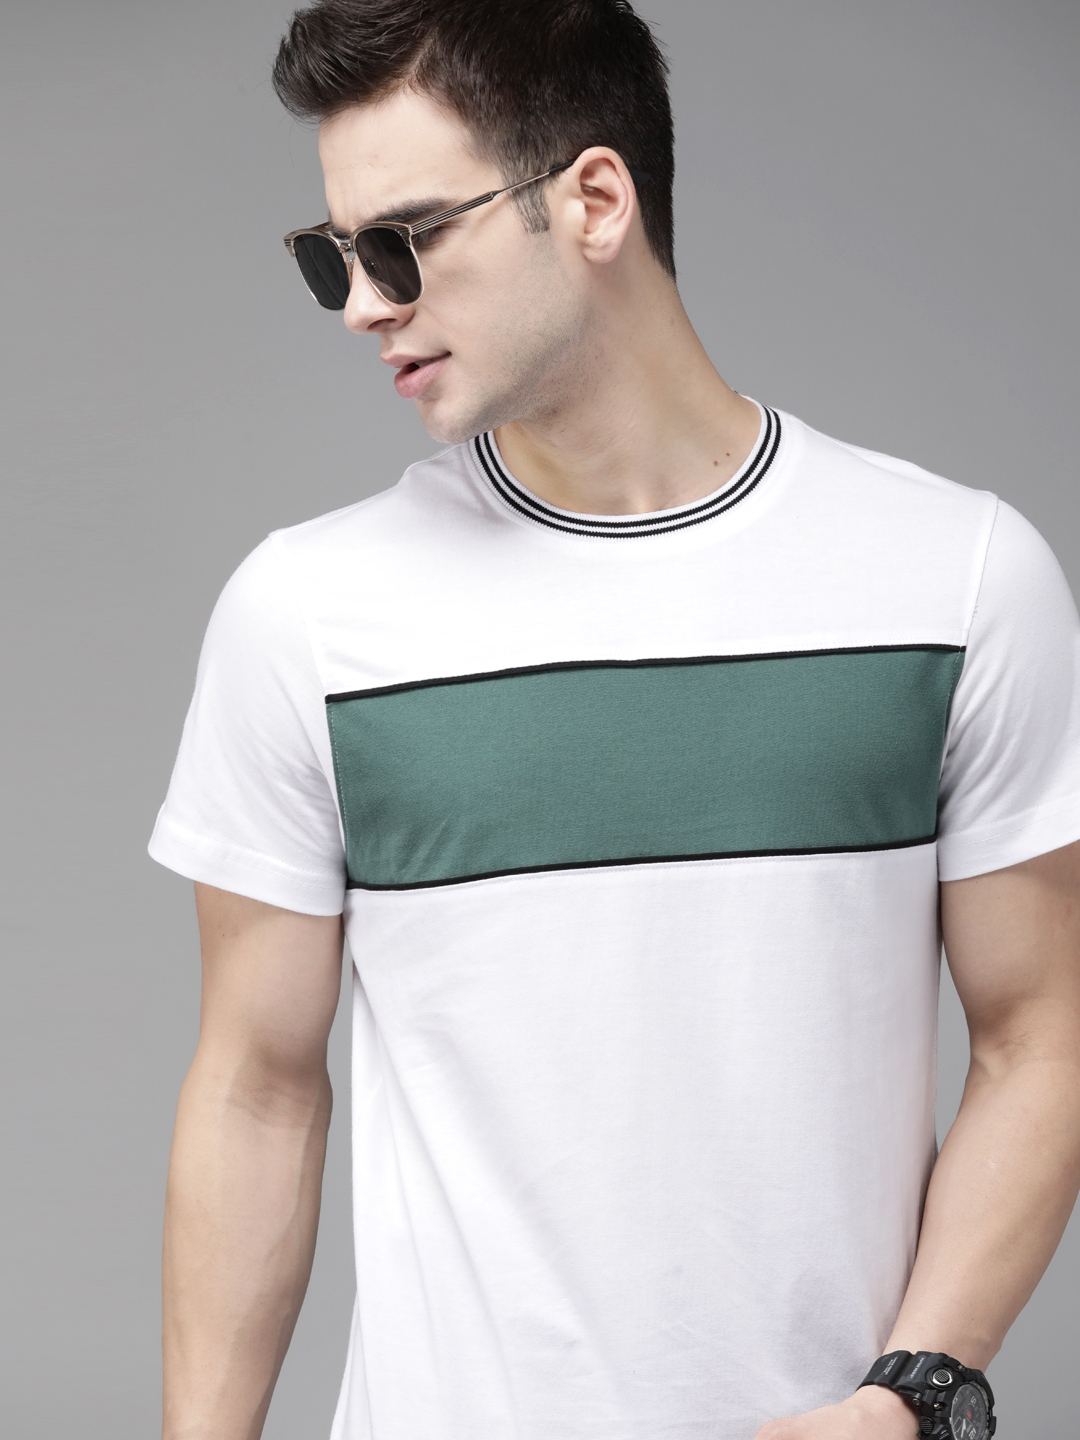 Buy The Roadster Lifestyle Co Men White & Green Pure Cotton ...